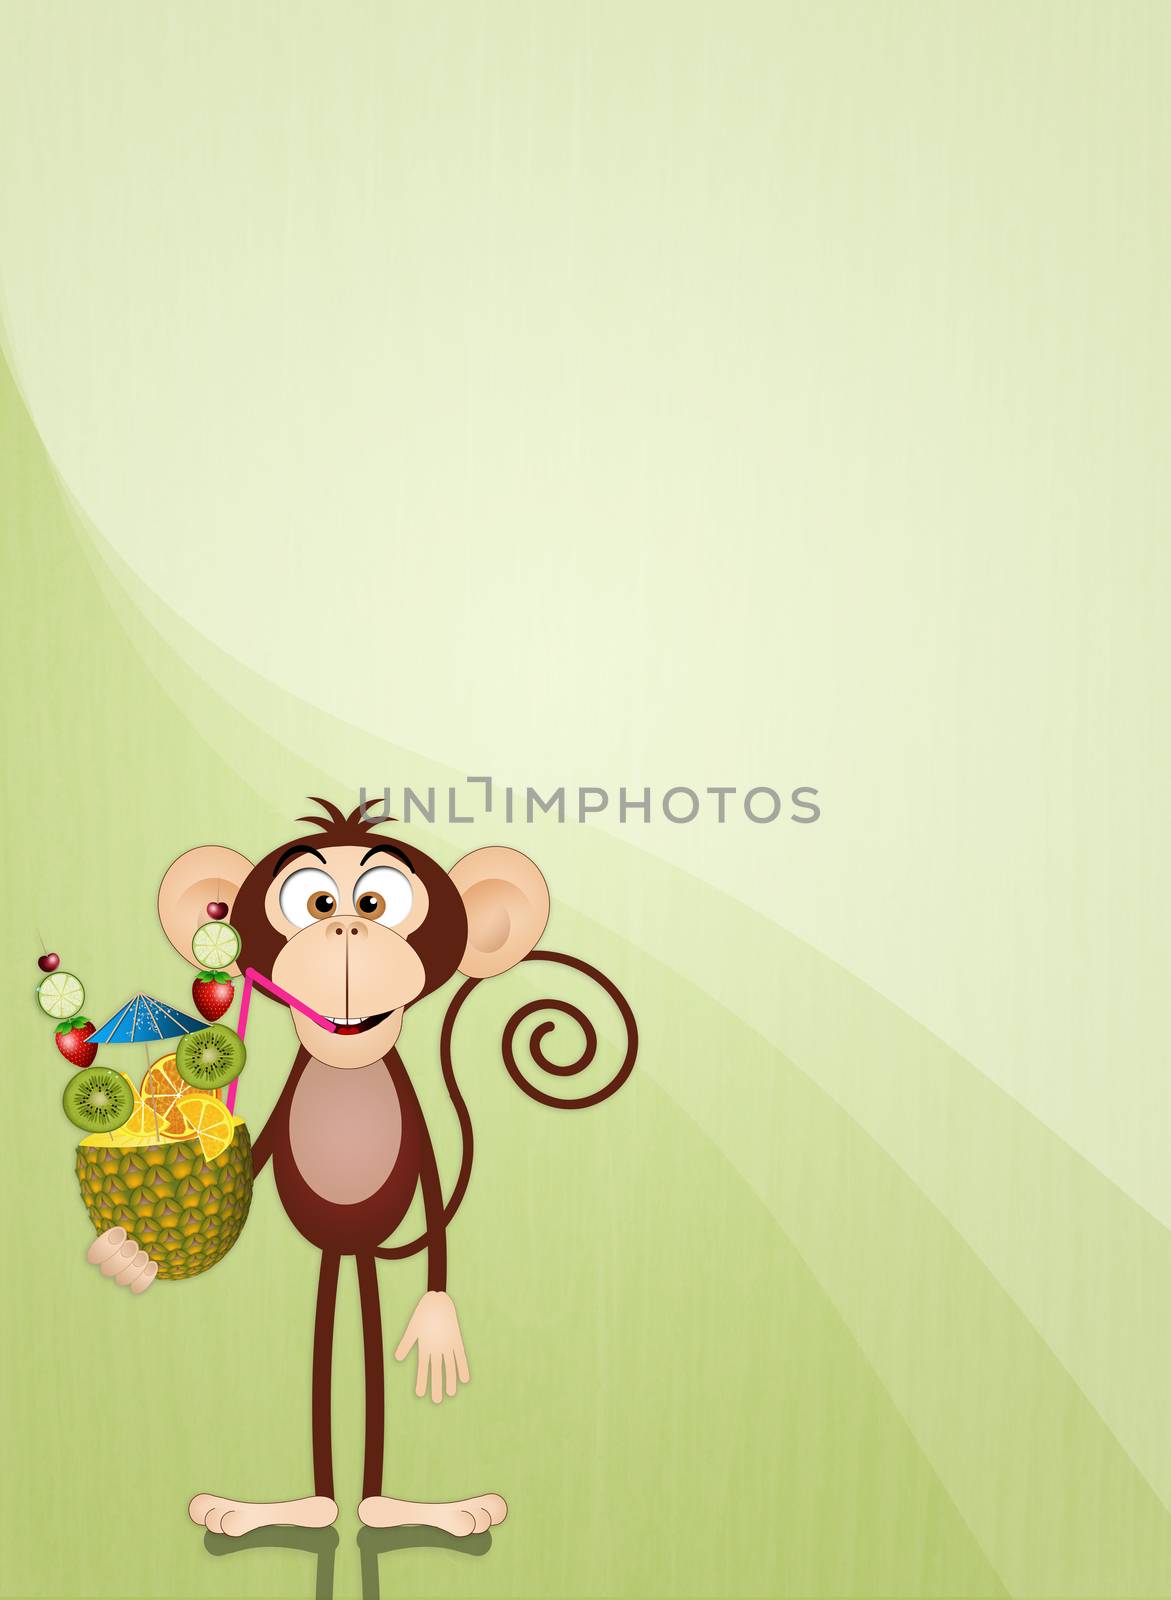 Monkey with pineapple background by sognolucido